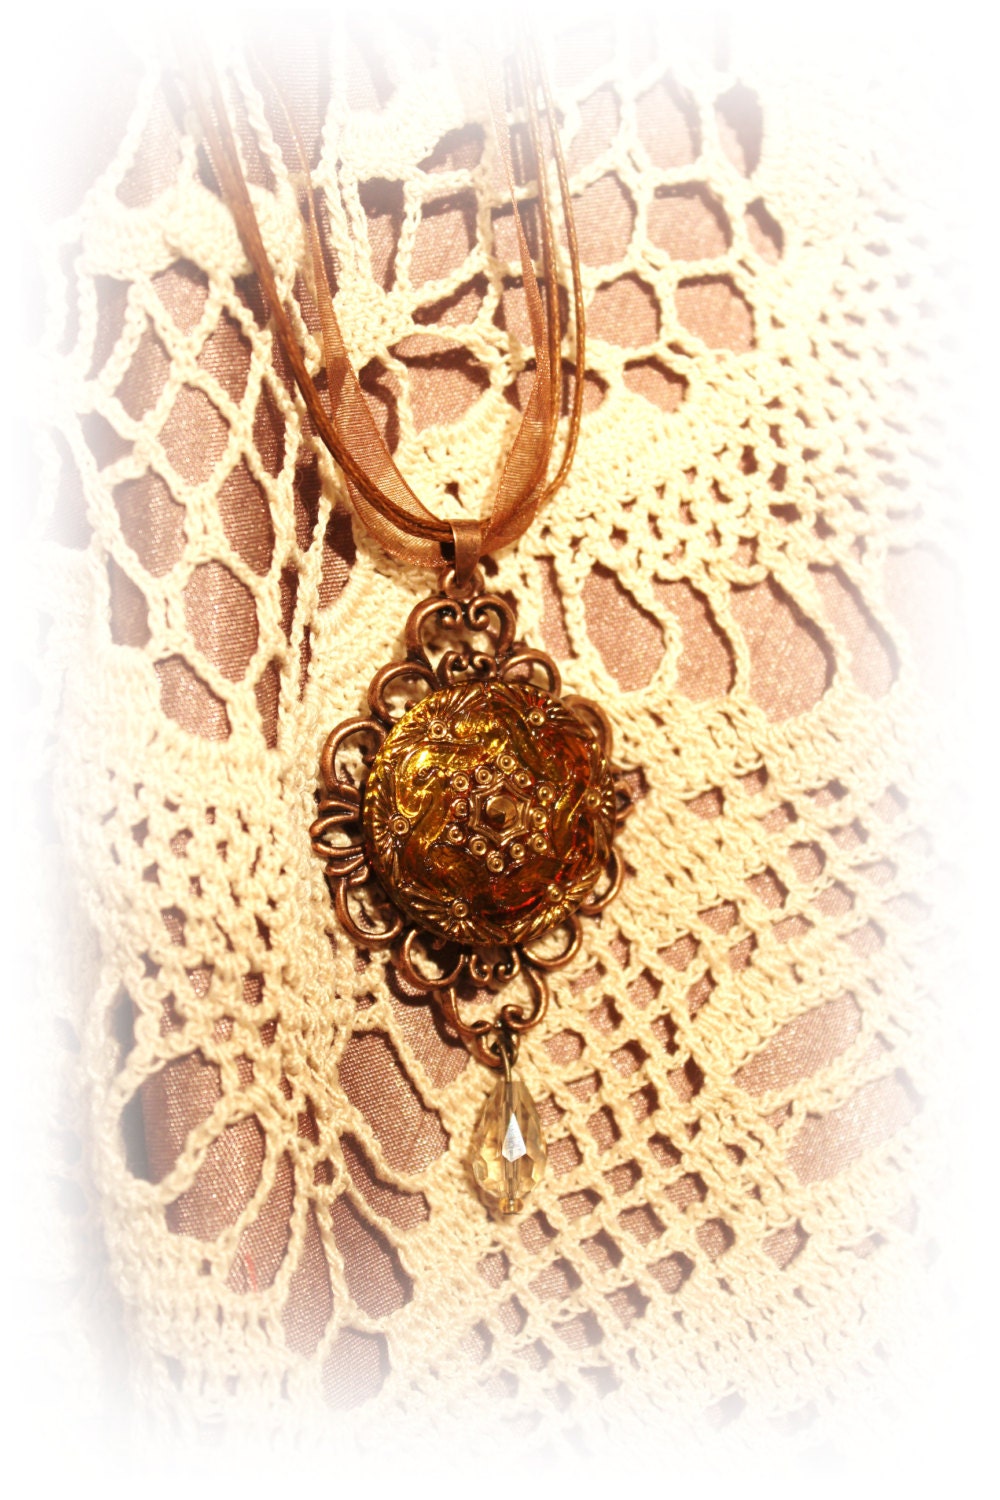 Czech Glass Button Pendant Necklace - Gold on Rose Gold with a teardrop dangle bead - Victorian Steampunk Taffeta Cord Jewelry